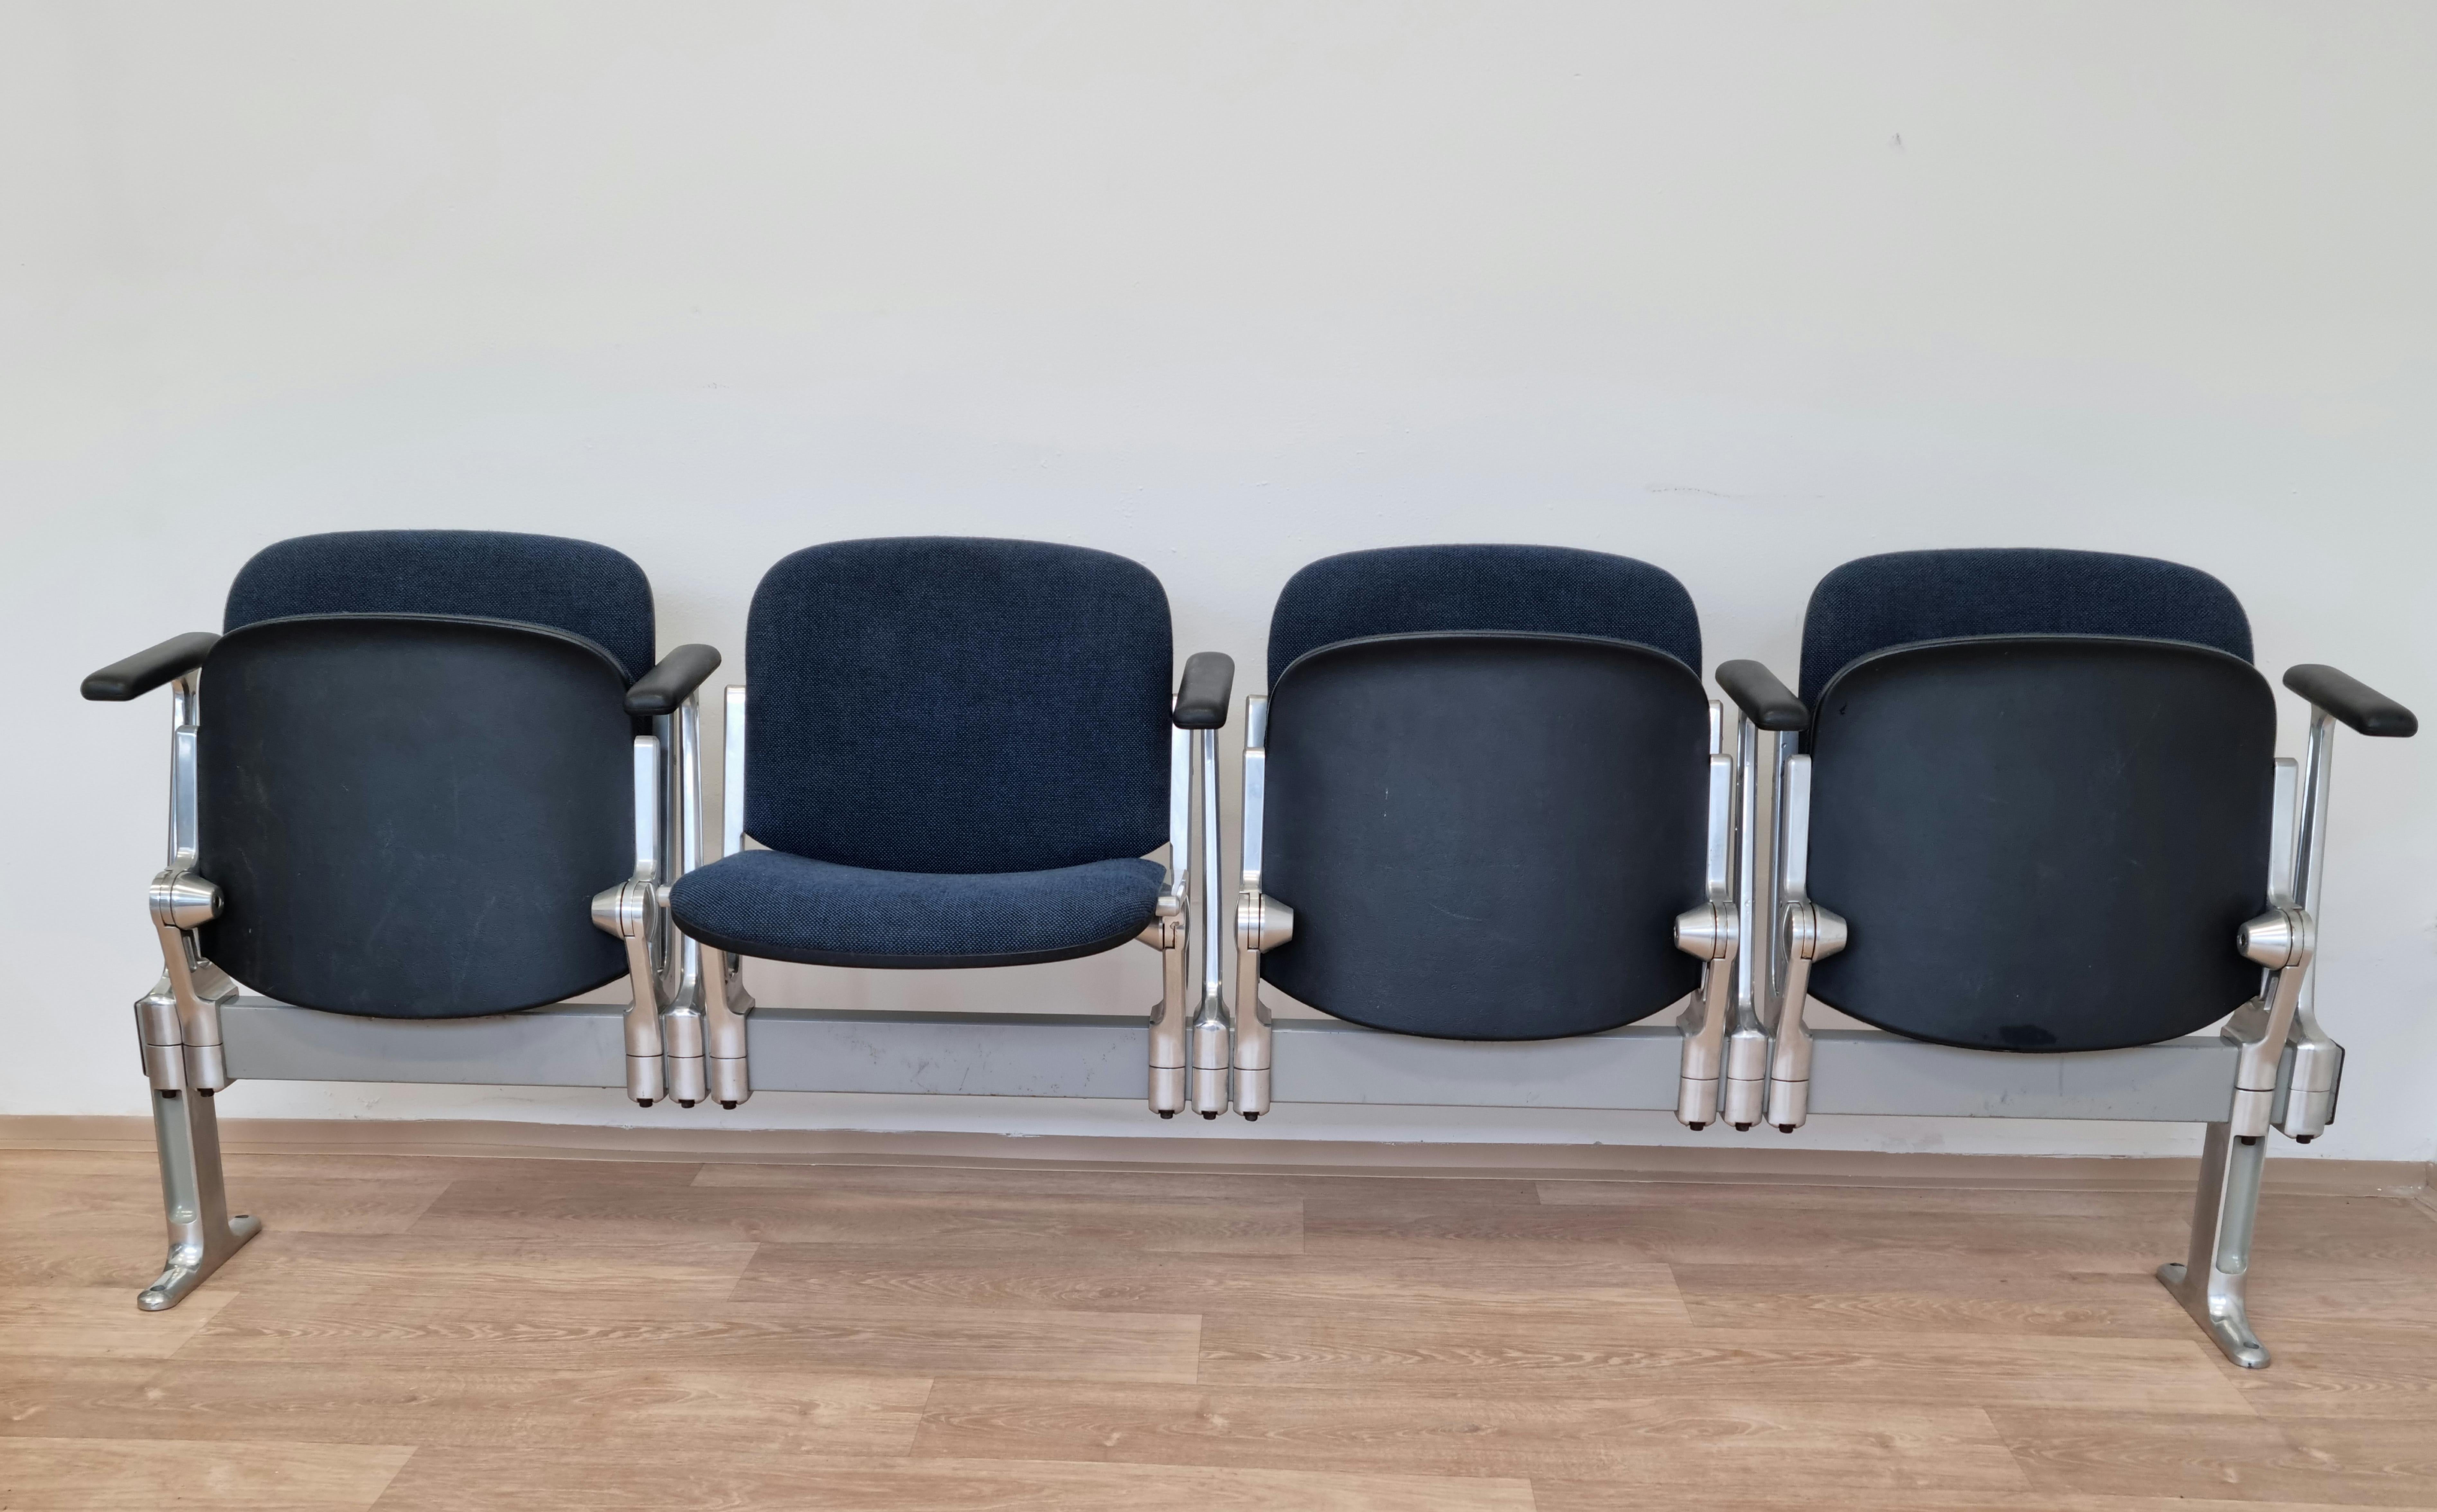 Midcentury Four-Seat Bench Castelli, Axis 3000, Giancarlo Piretti, Italy, 1970s In Good Condition For Sale In Praha, CZ